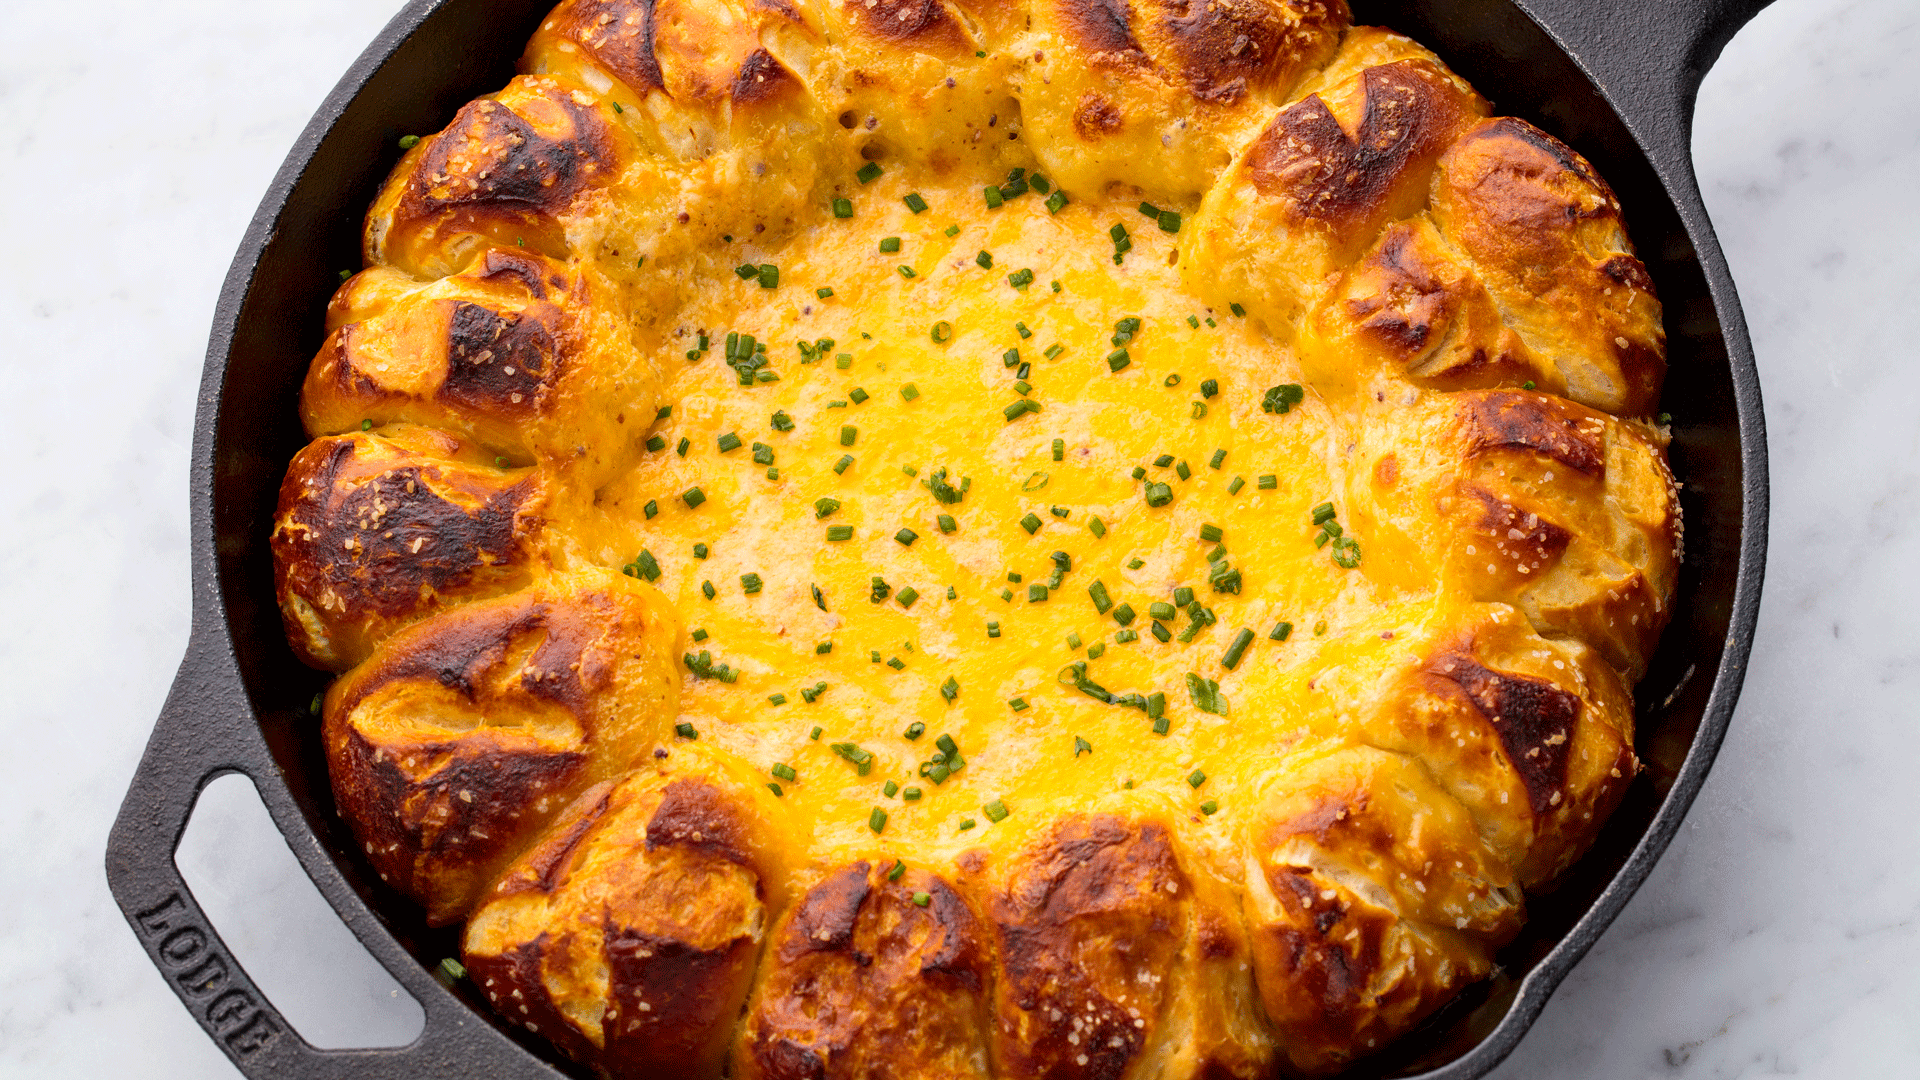 How to make Homemade Cheese Dip for Pretzels